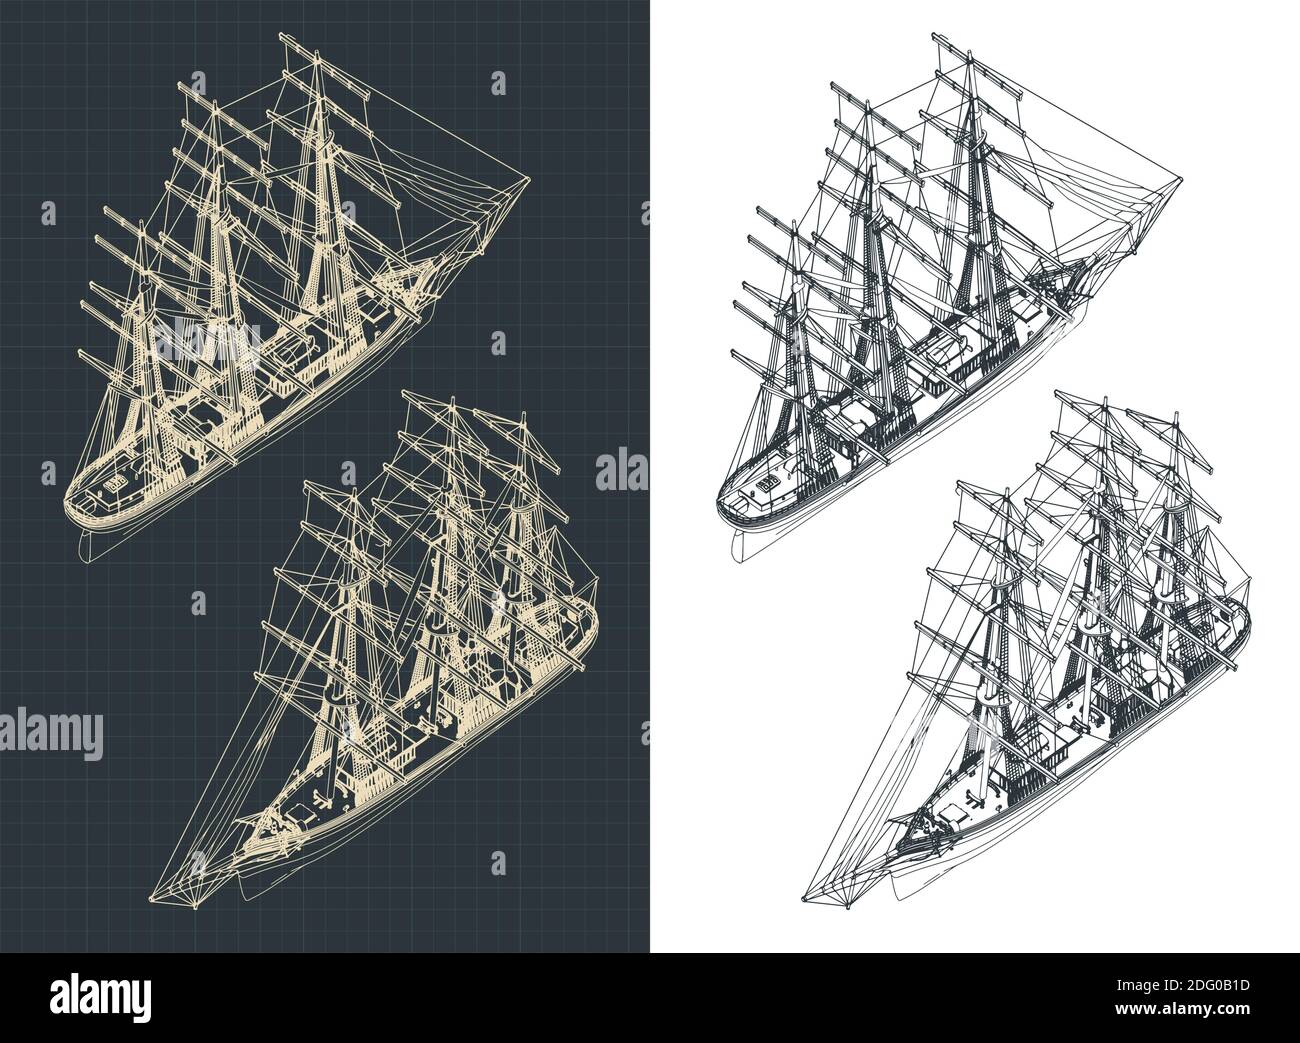 Stylized vector illustration of a large three-masted sailing ship isometric drawings with the sails down Stock Vector